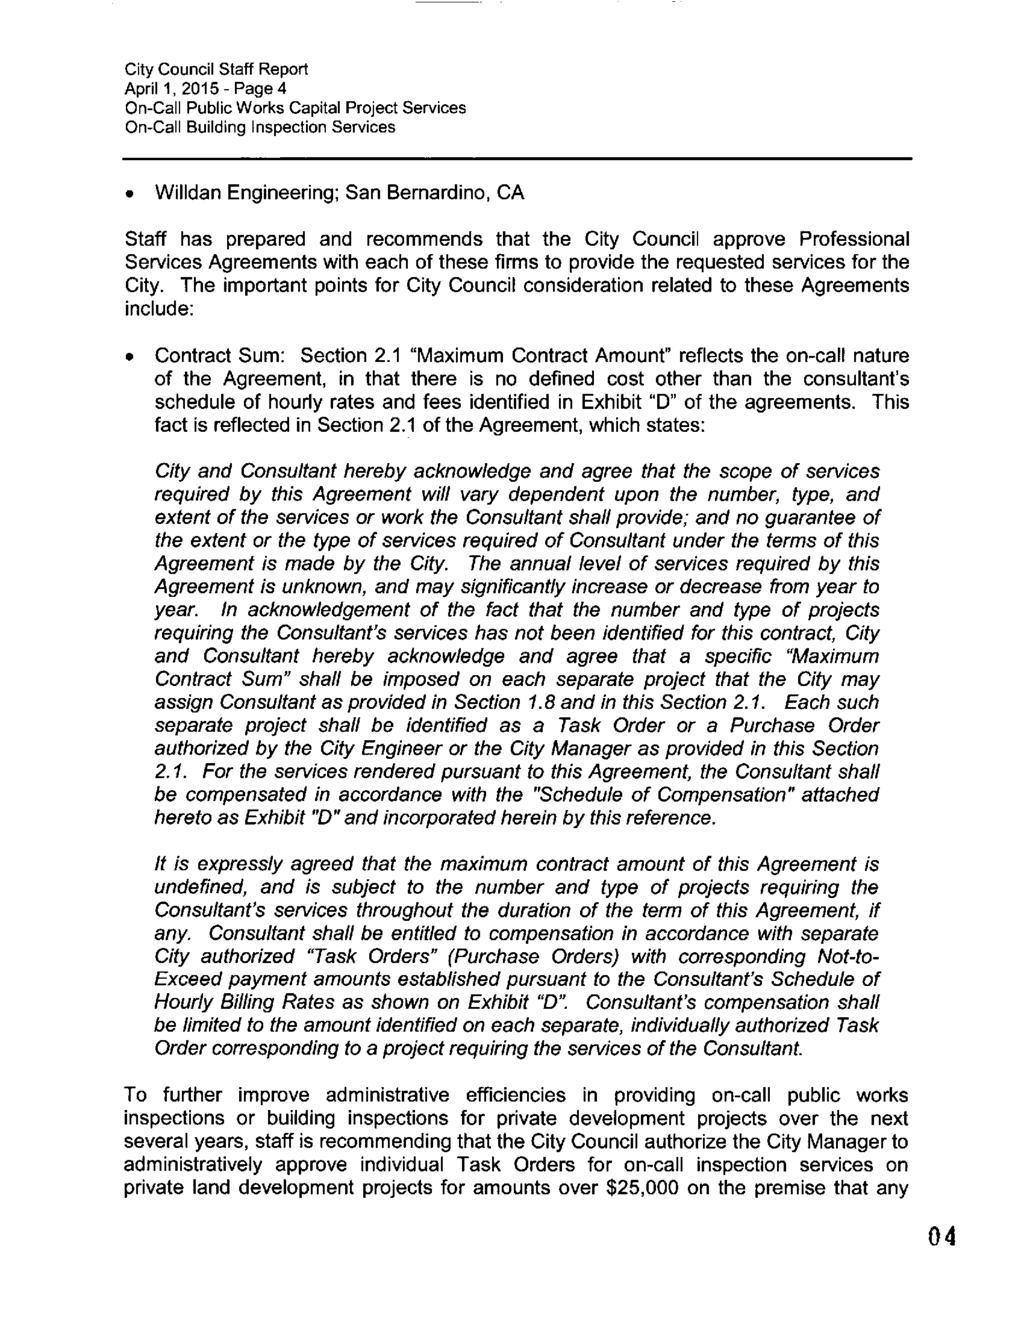 April 1, 2015- Page 4 Willdan Engineering; San Bernardino, CA Staff has prepared and recommends that the City Council approve Professional Services Agreements with each of these firms to provide the